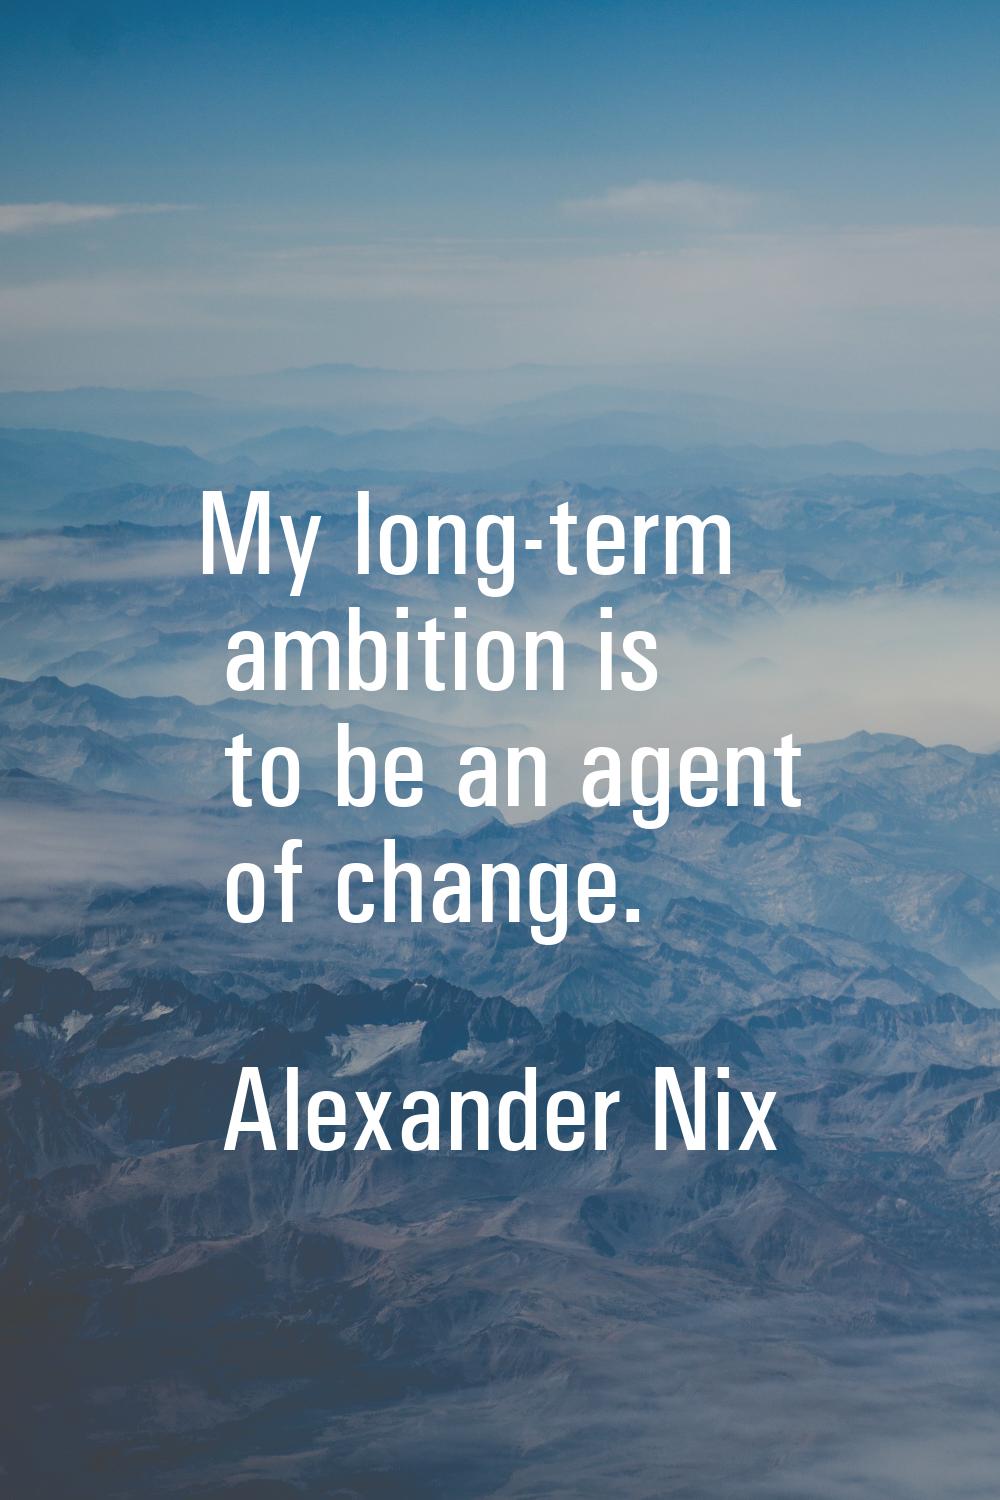 My long-term ambition is to be an agent of change.